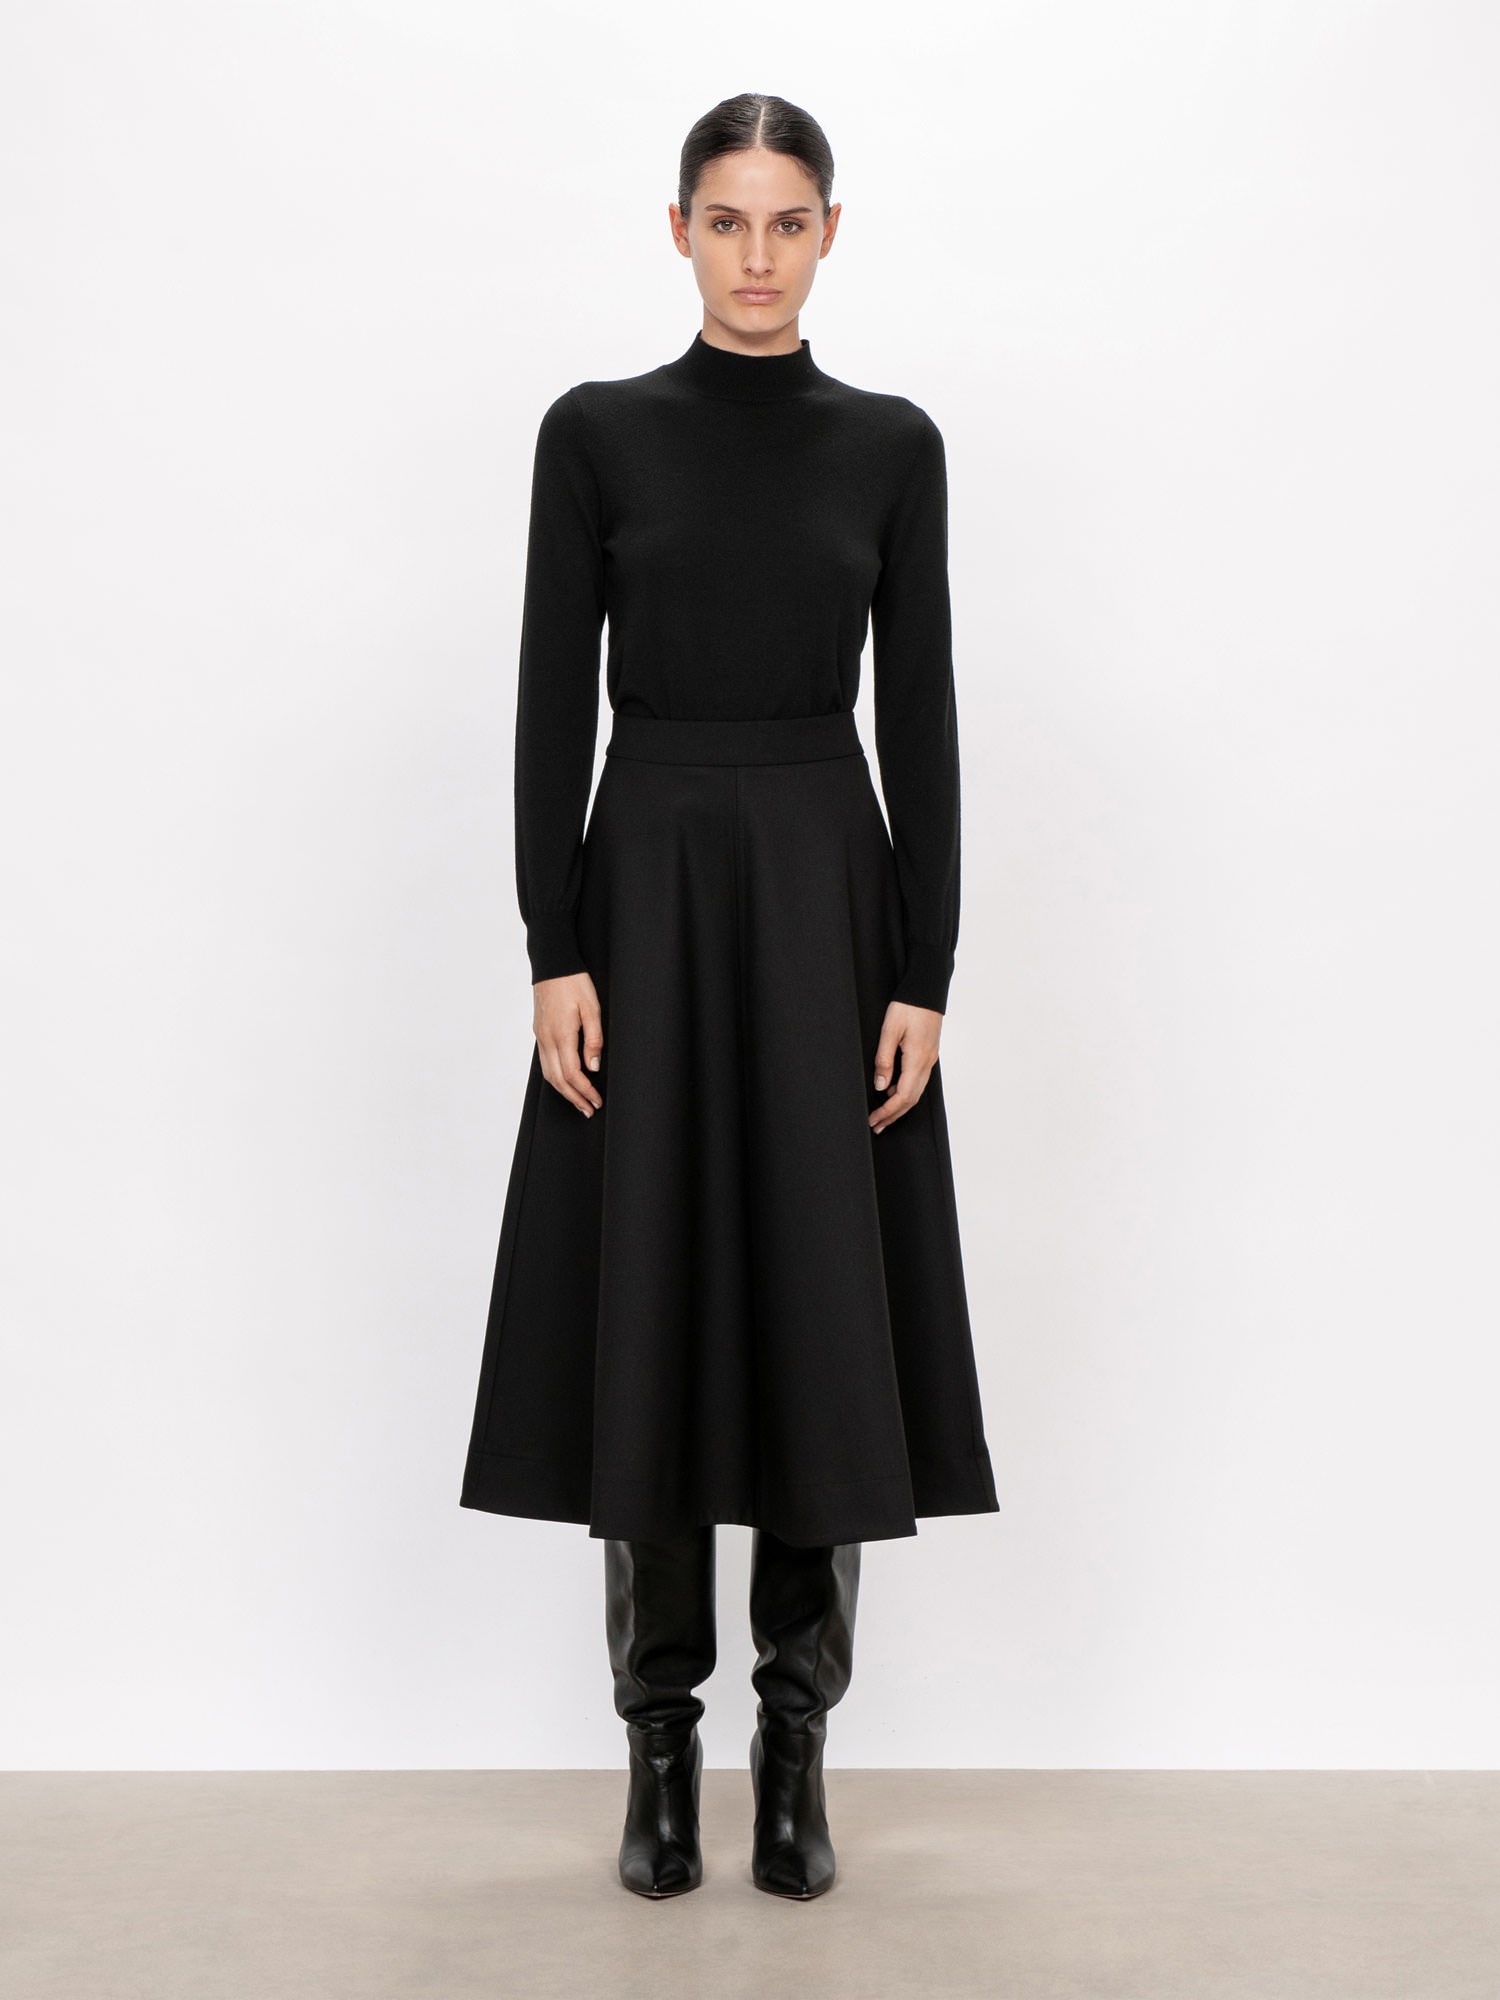 Double Weave Fluted Skirt | Buy Skirts Online - Veronika Maine